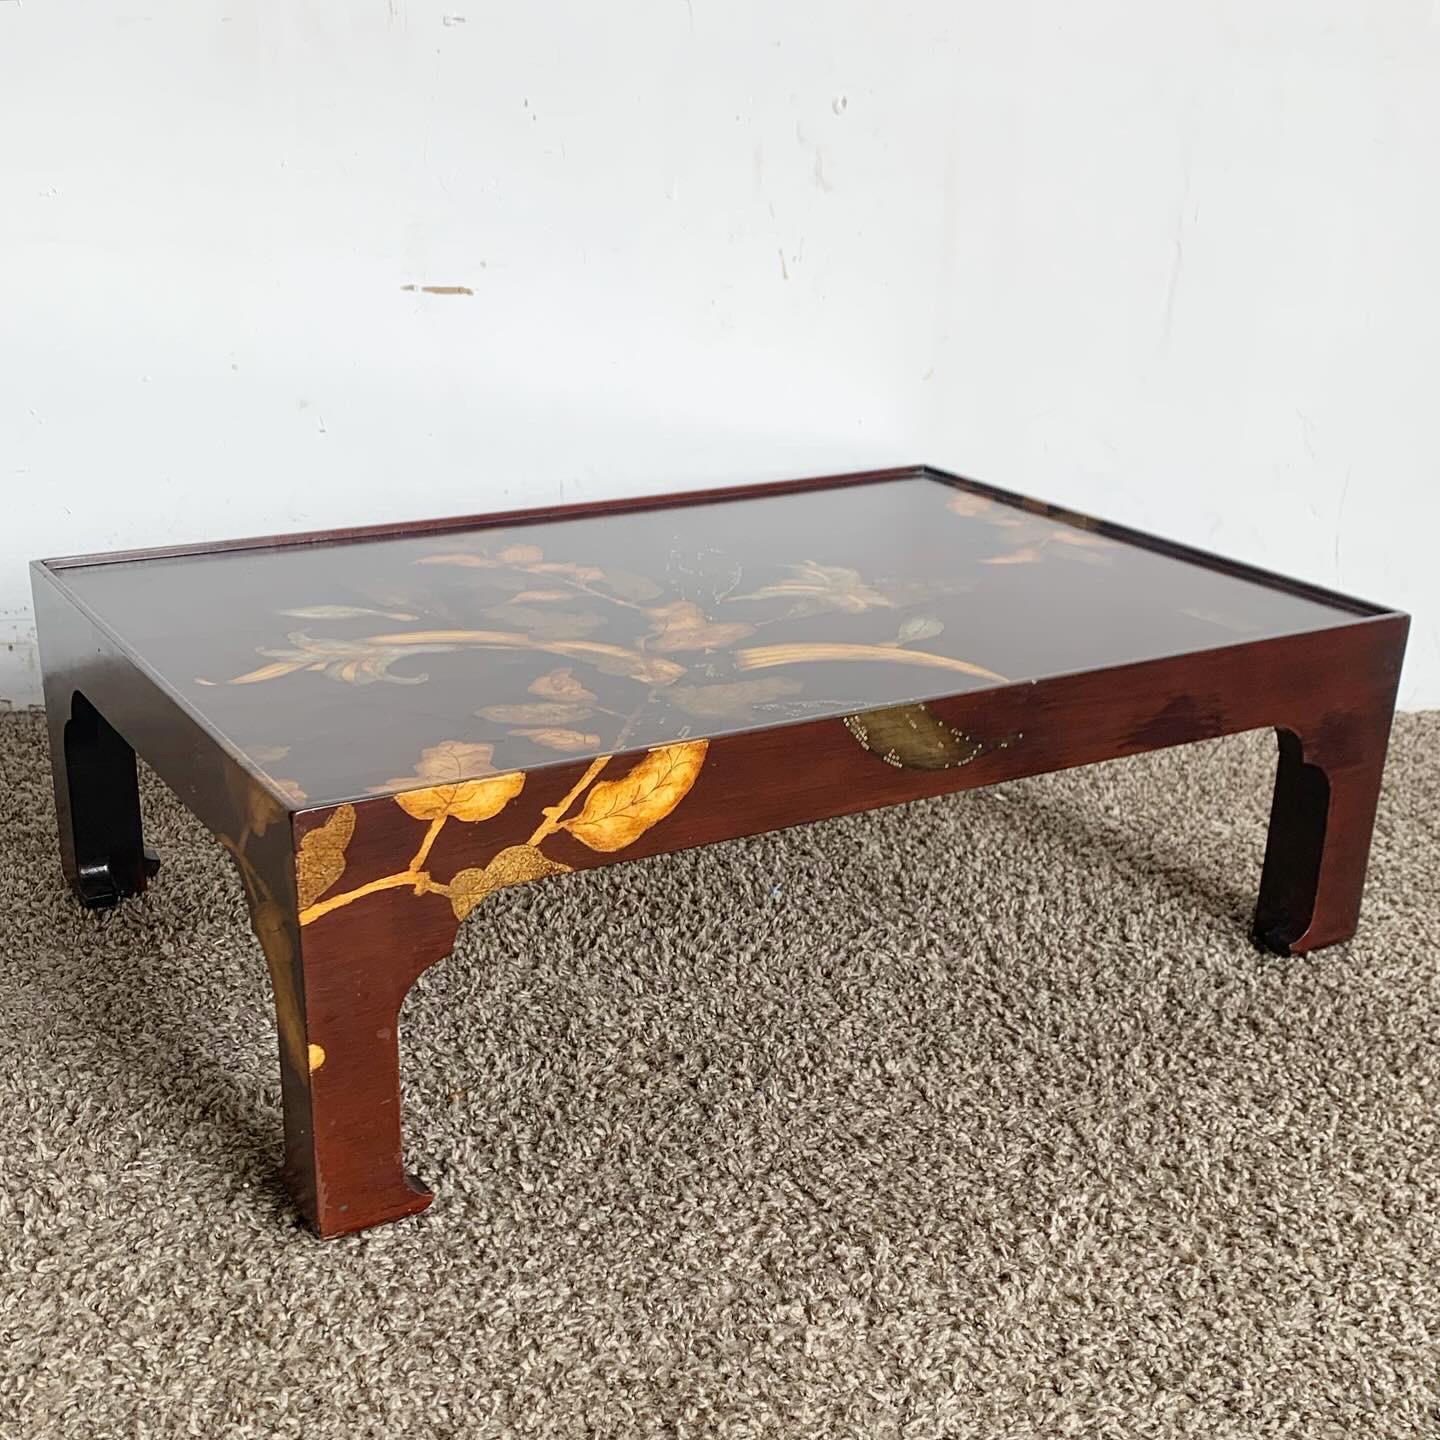 The Vintage Asian Wooden Inlaid Prayer Table is a stunning display of traditional Asian craftsmanship. Featuring intricate wooden inlays with delicate foliage designs, it reflects the beauty of natural wood shades and grains. Sturdy and elegantly